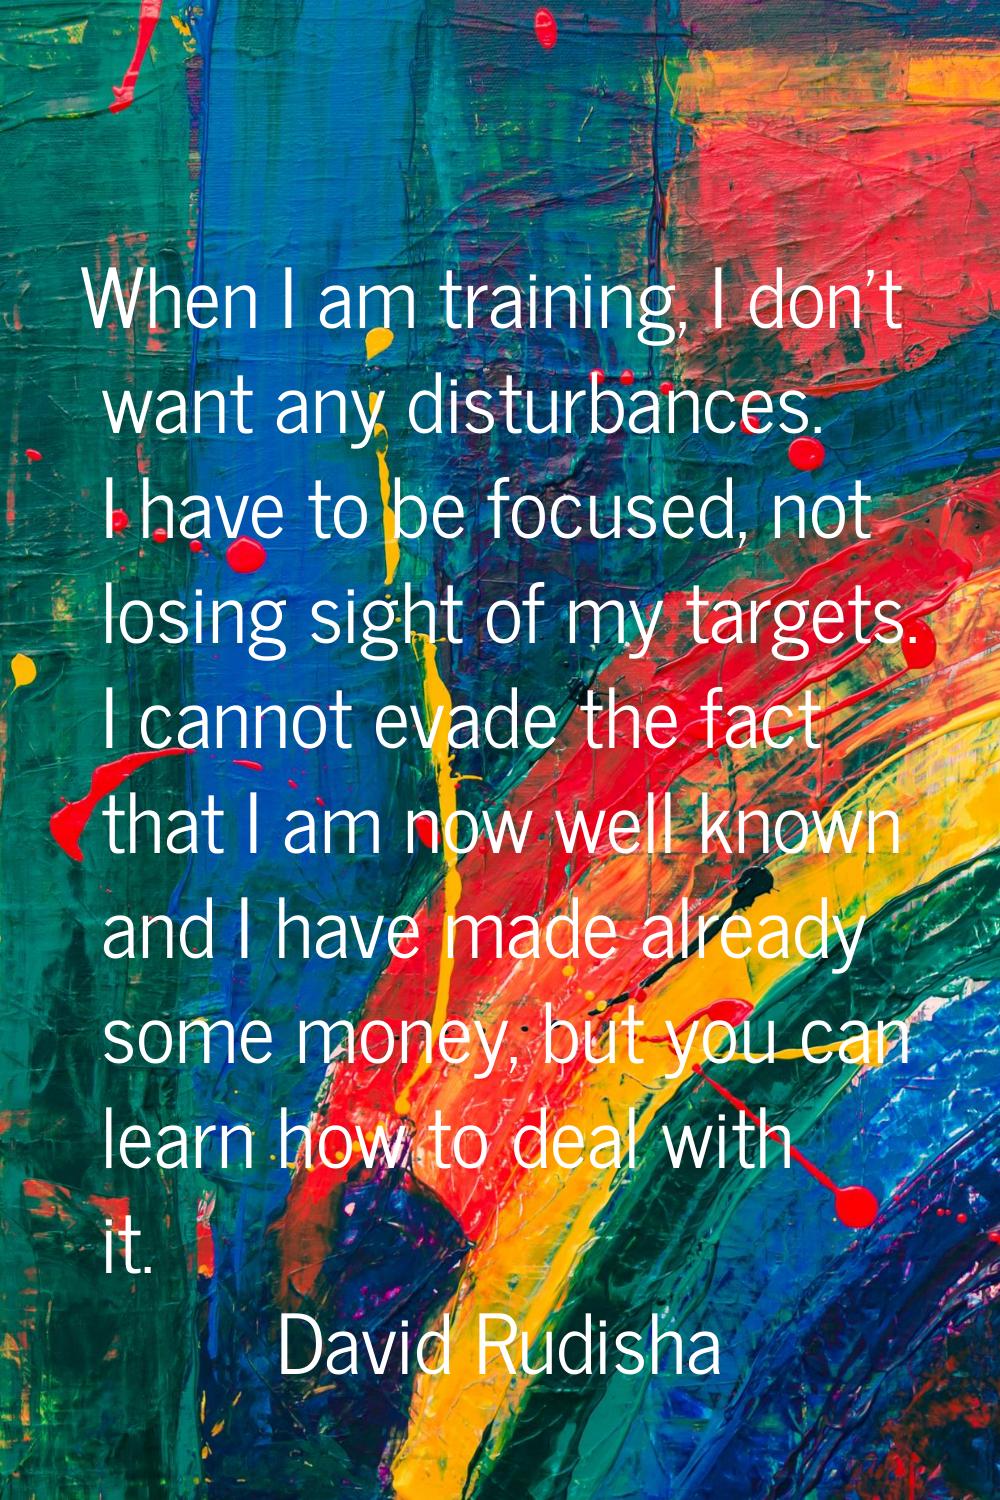 When I am training, I don't want any disturbances. I have to be focused, not losing sight of my tar